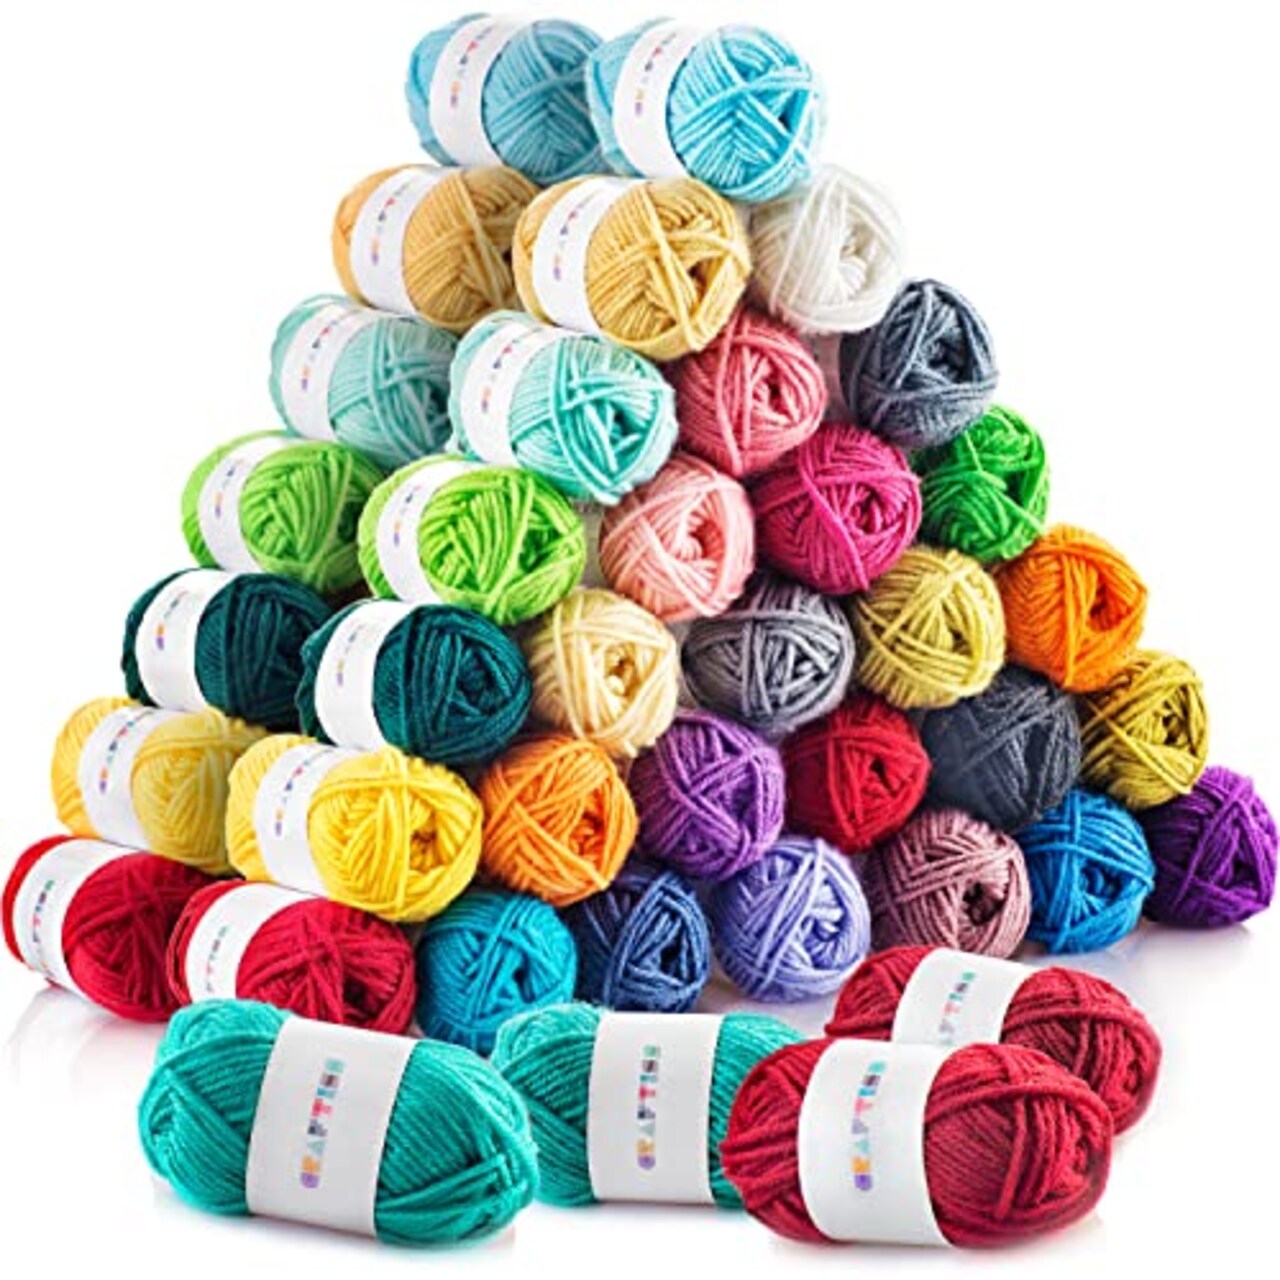 60*20g Acrylic Yarn Skeins - 2600 Yards of Soft Yarn for Crocheting,  Knitting and Craft Projects